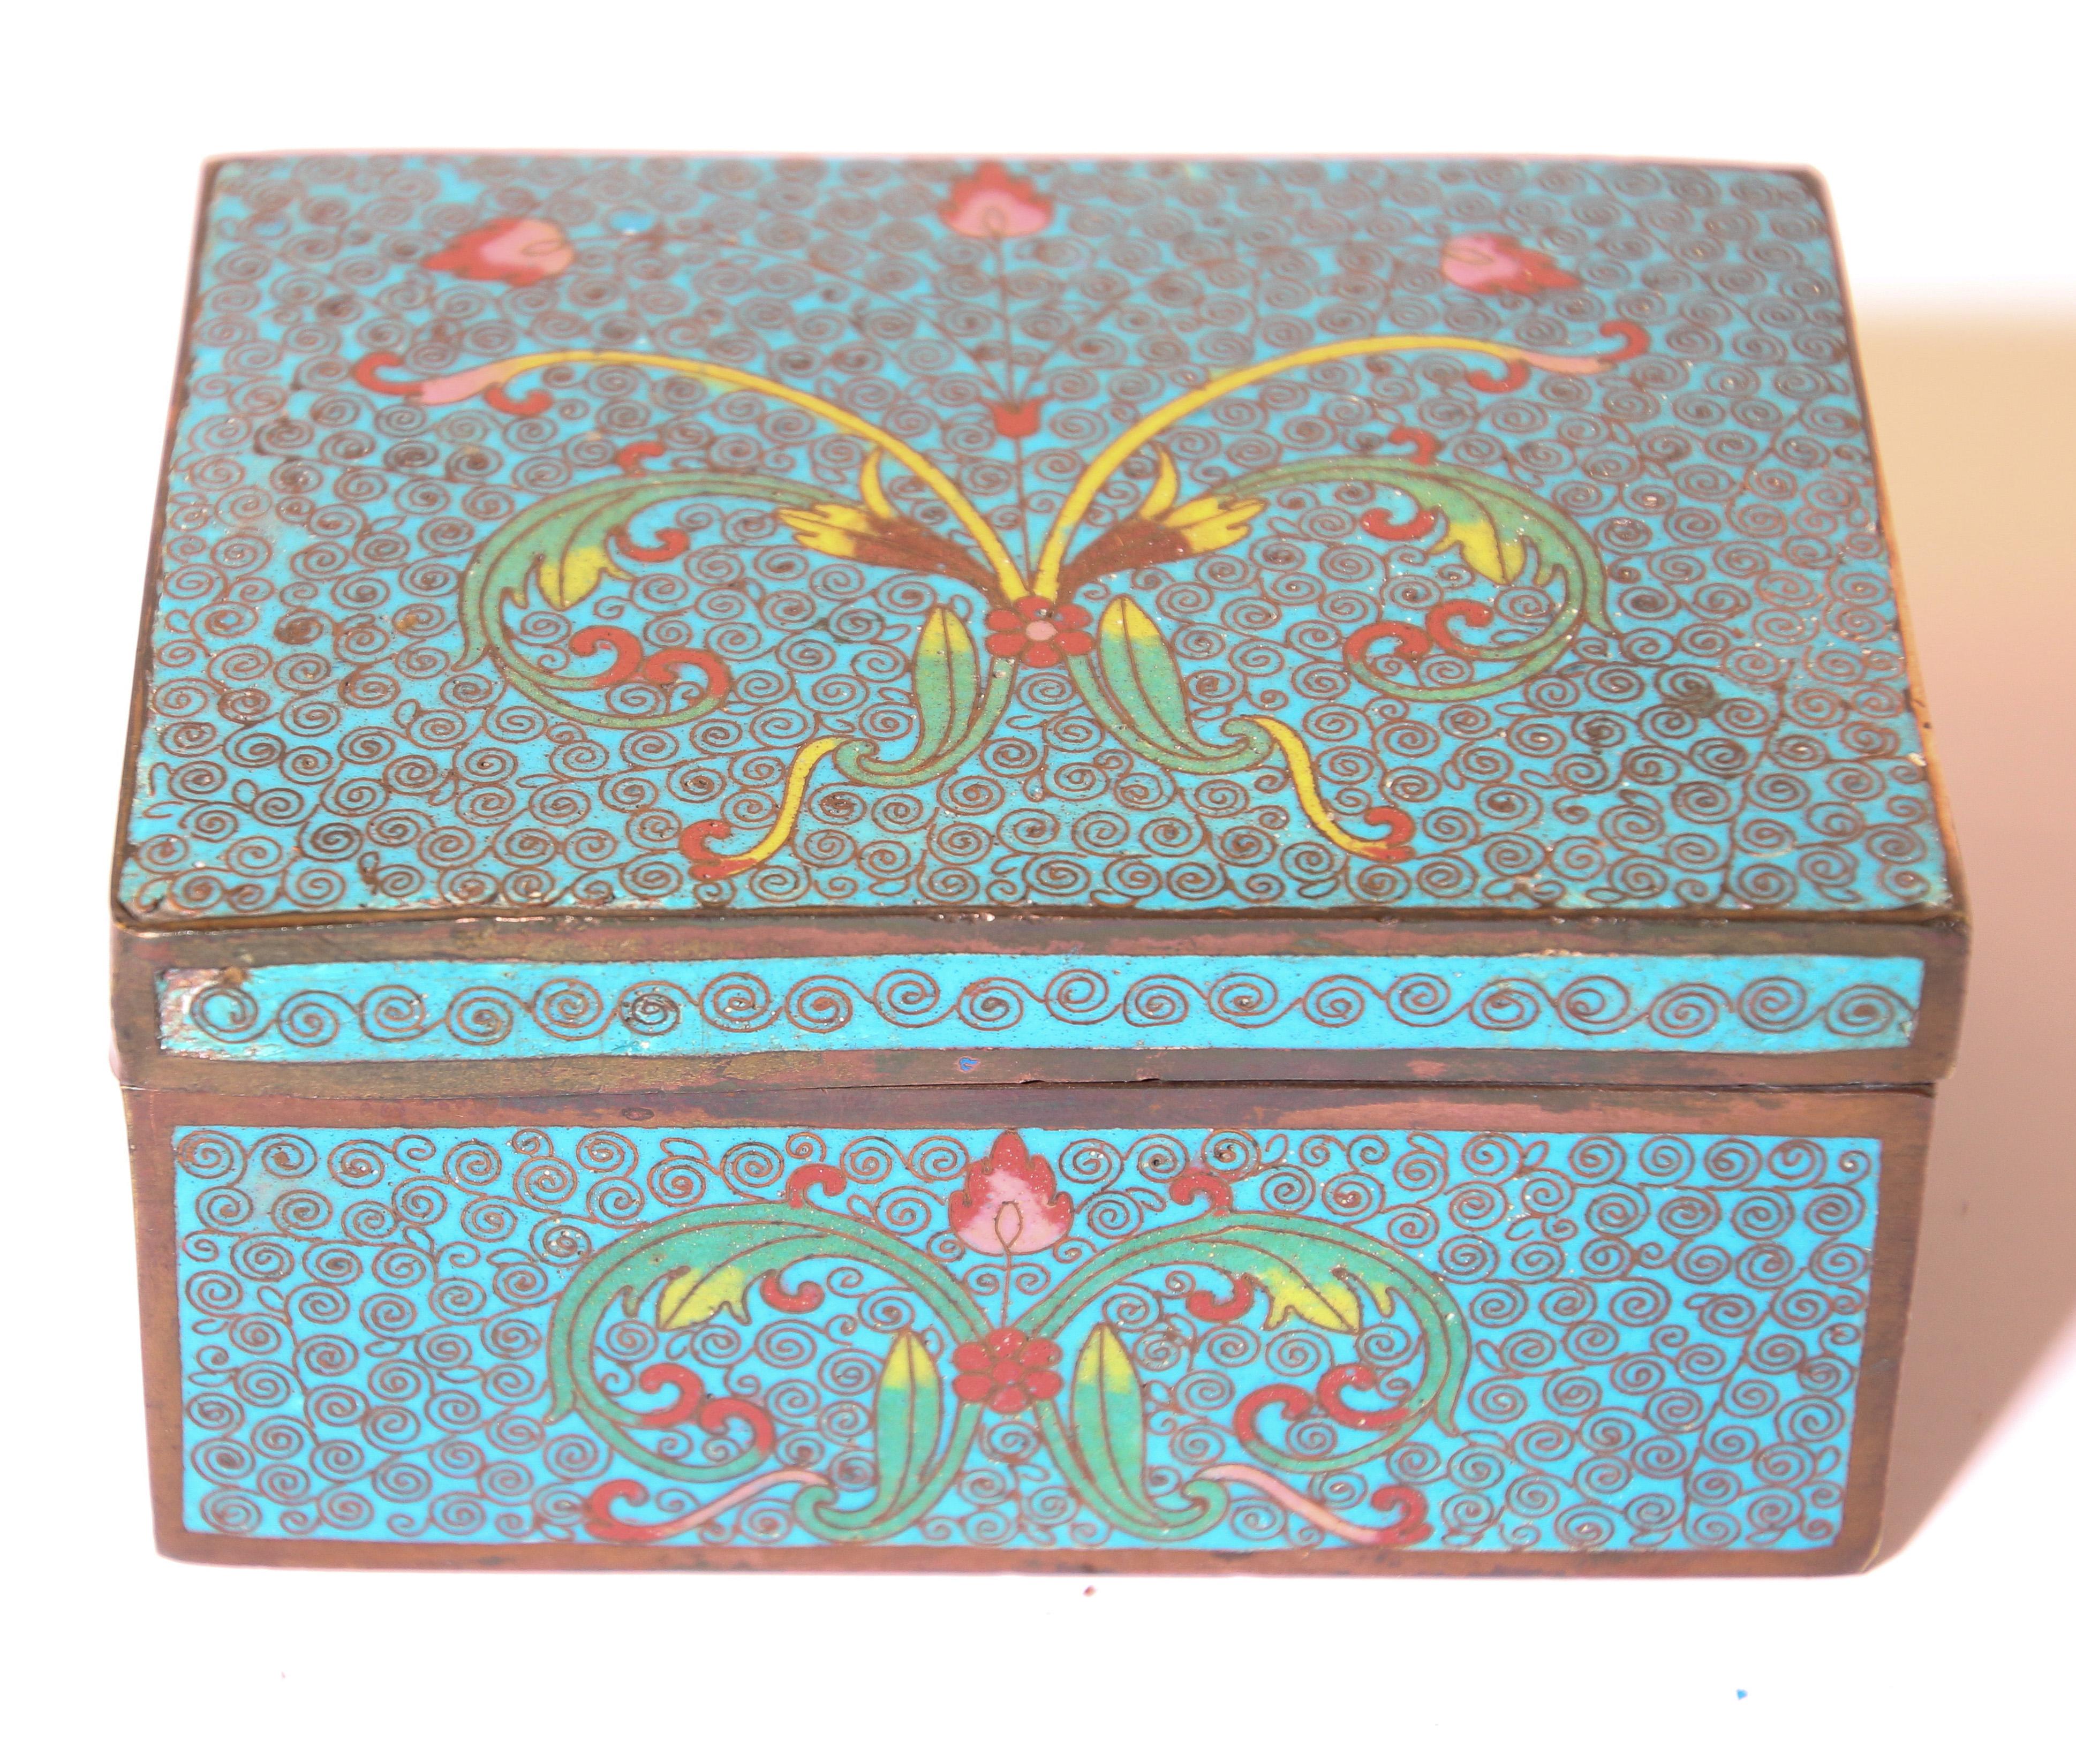 Chinese Vintage Trinket Metal Box with Hand Painted Enamel Asian Design